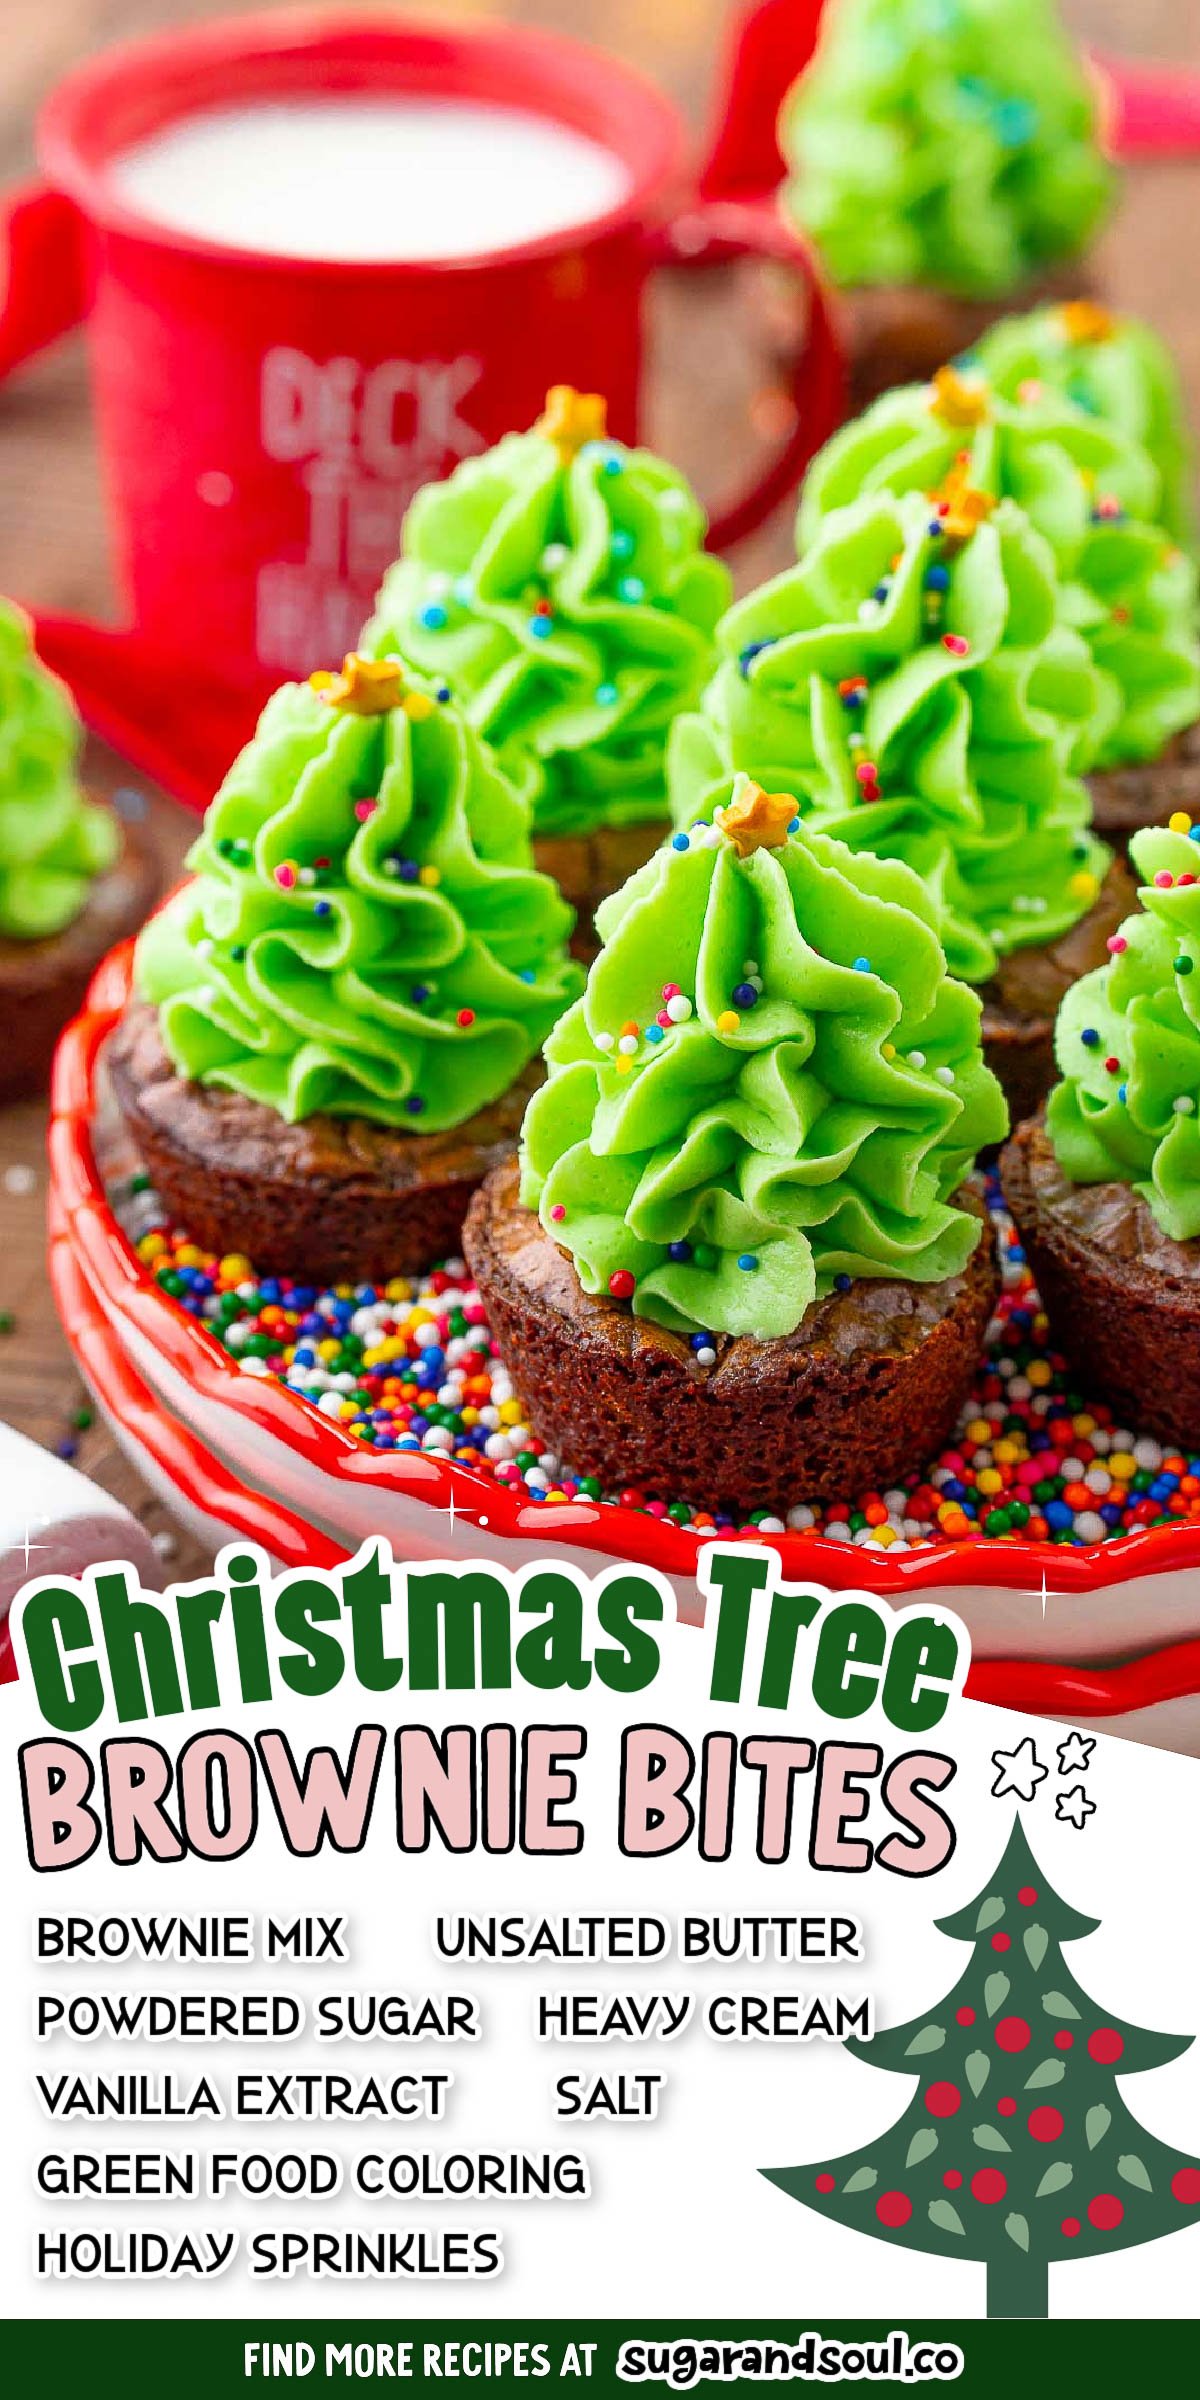 These Christmas Tree Brownie Bites combine homemade buttercream frosting with a boxed brownie mix to create a deliciously festive treat! An easy-to-make dessert that kids will love! via @sugarandsoulco